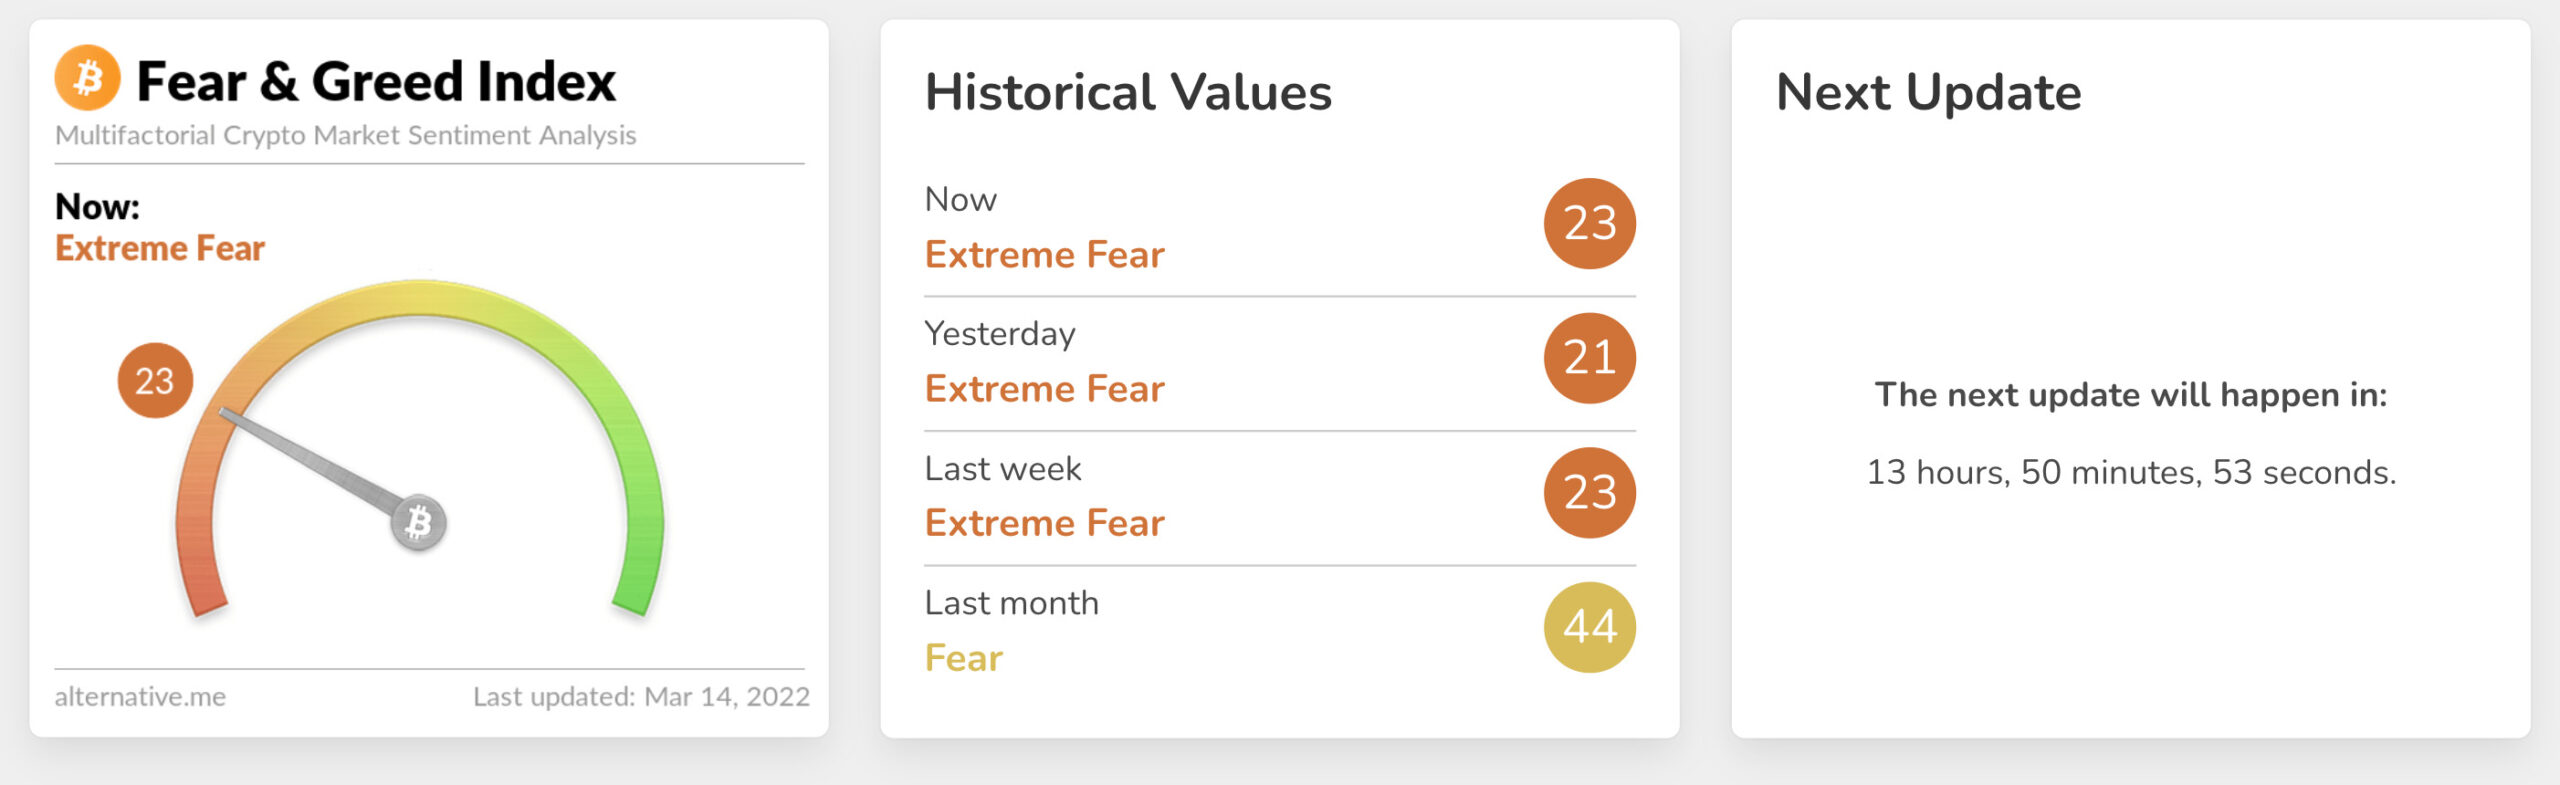 Fear & Greed Index của Bitcoin 